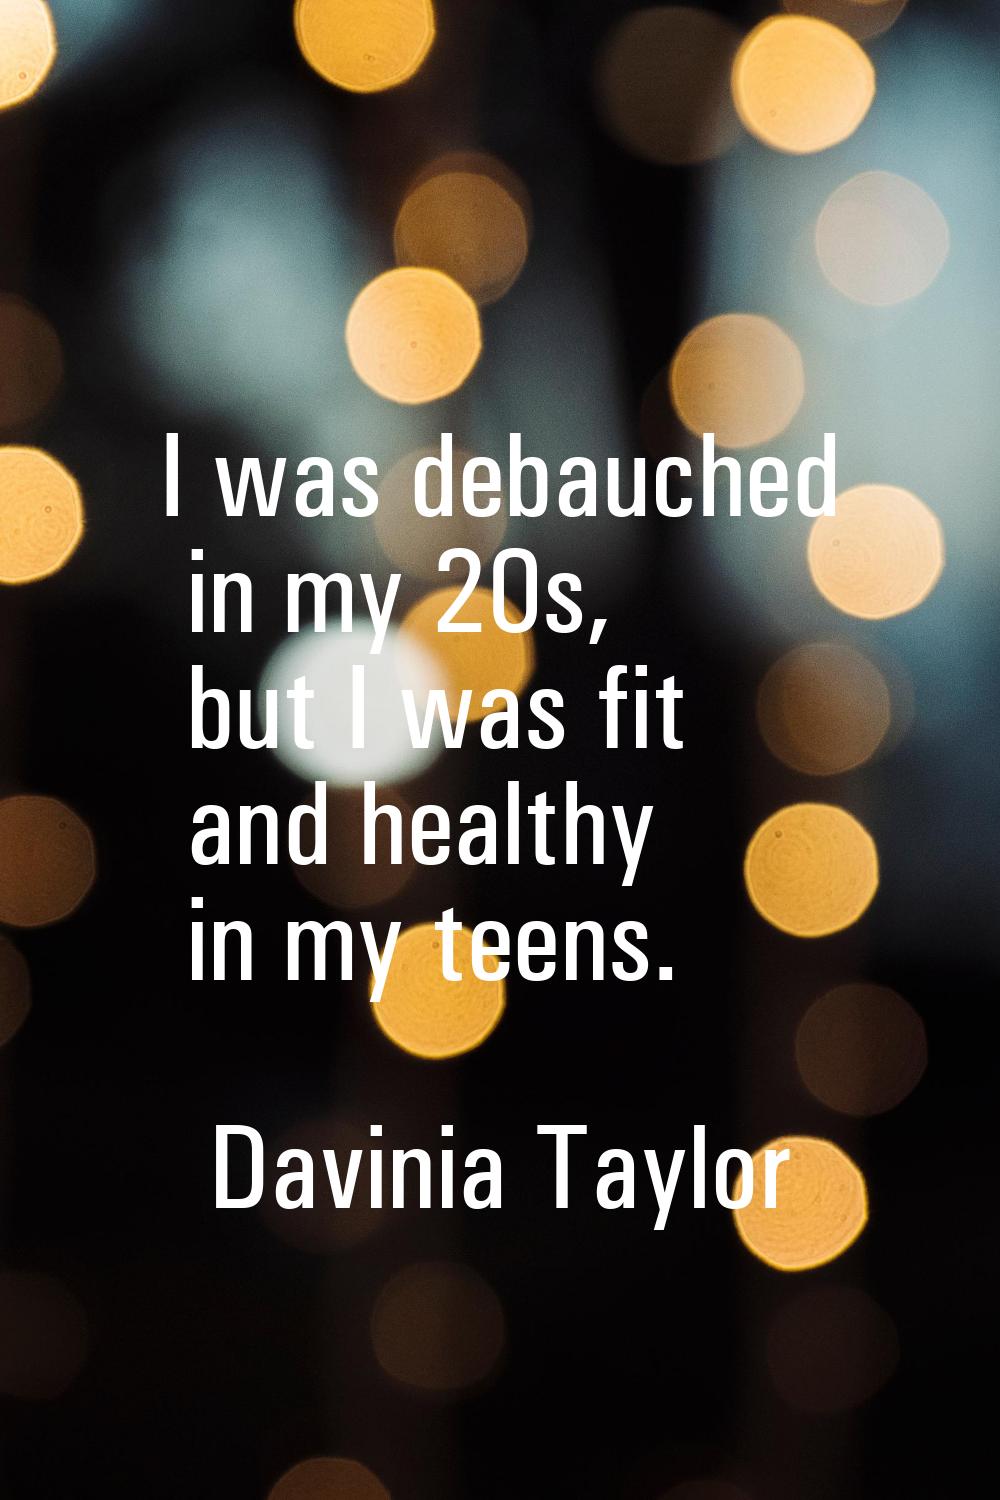 I was debauched in my 20s, but I was fit and healthy in my teens.